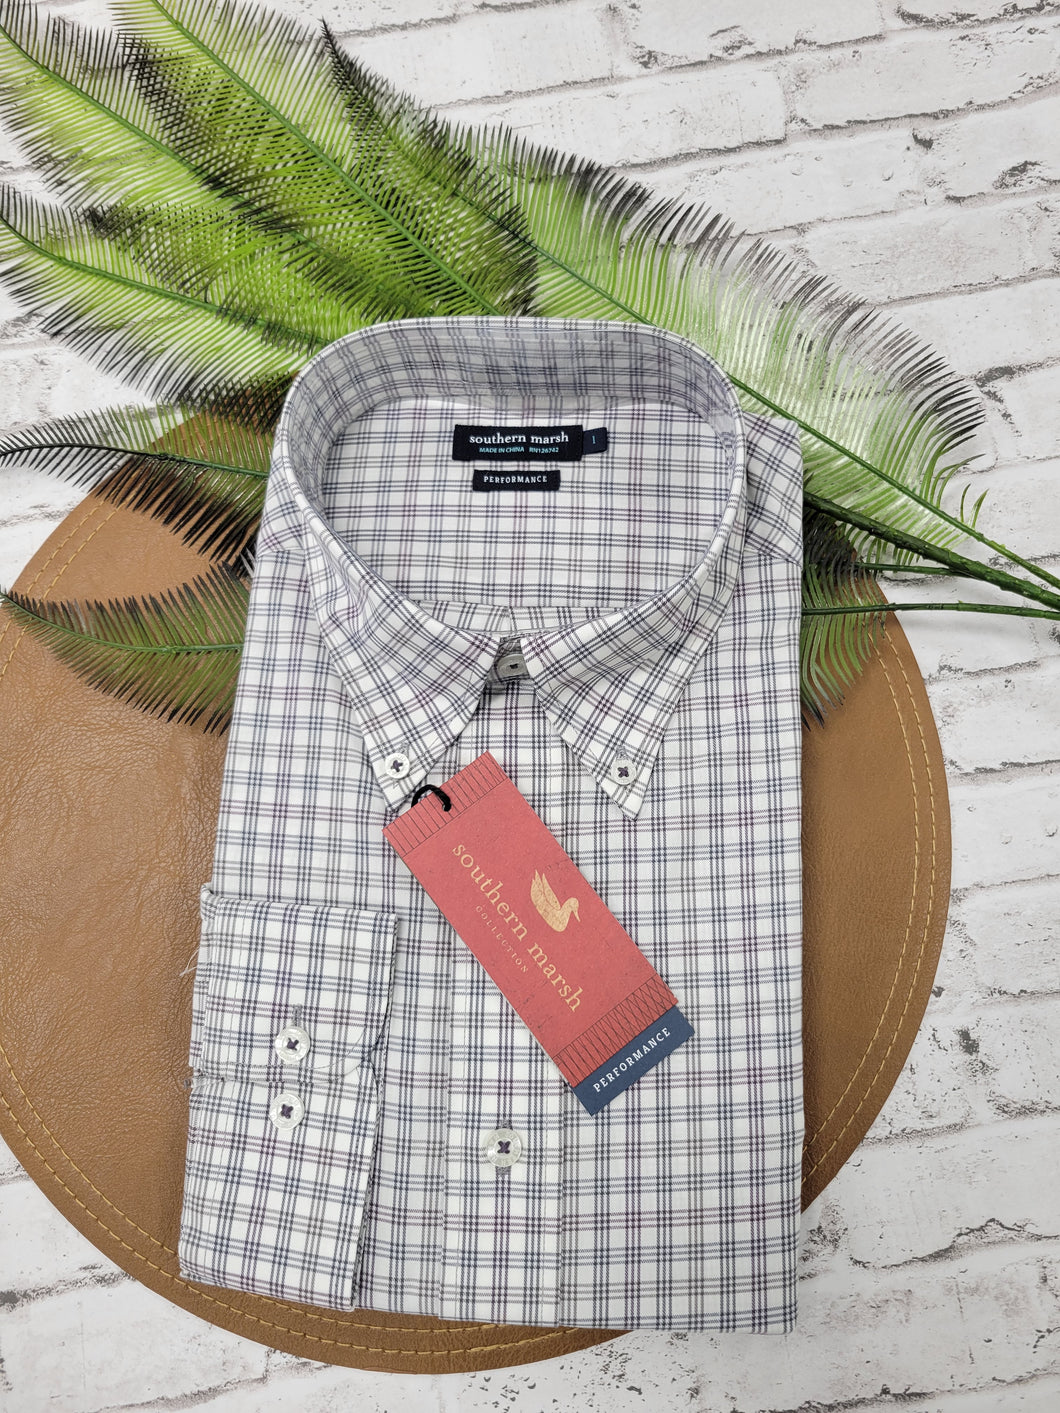 Southern Marsh Odessa Button Down Slate and Gray